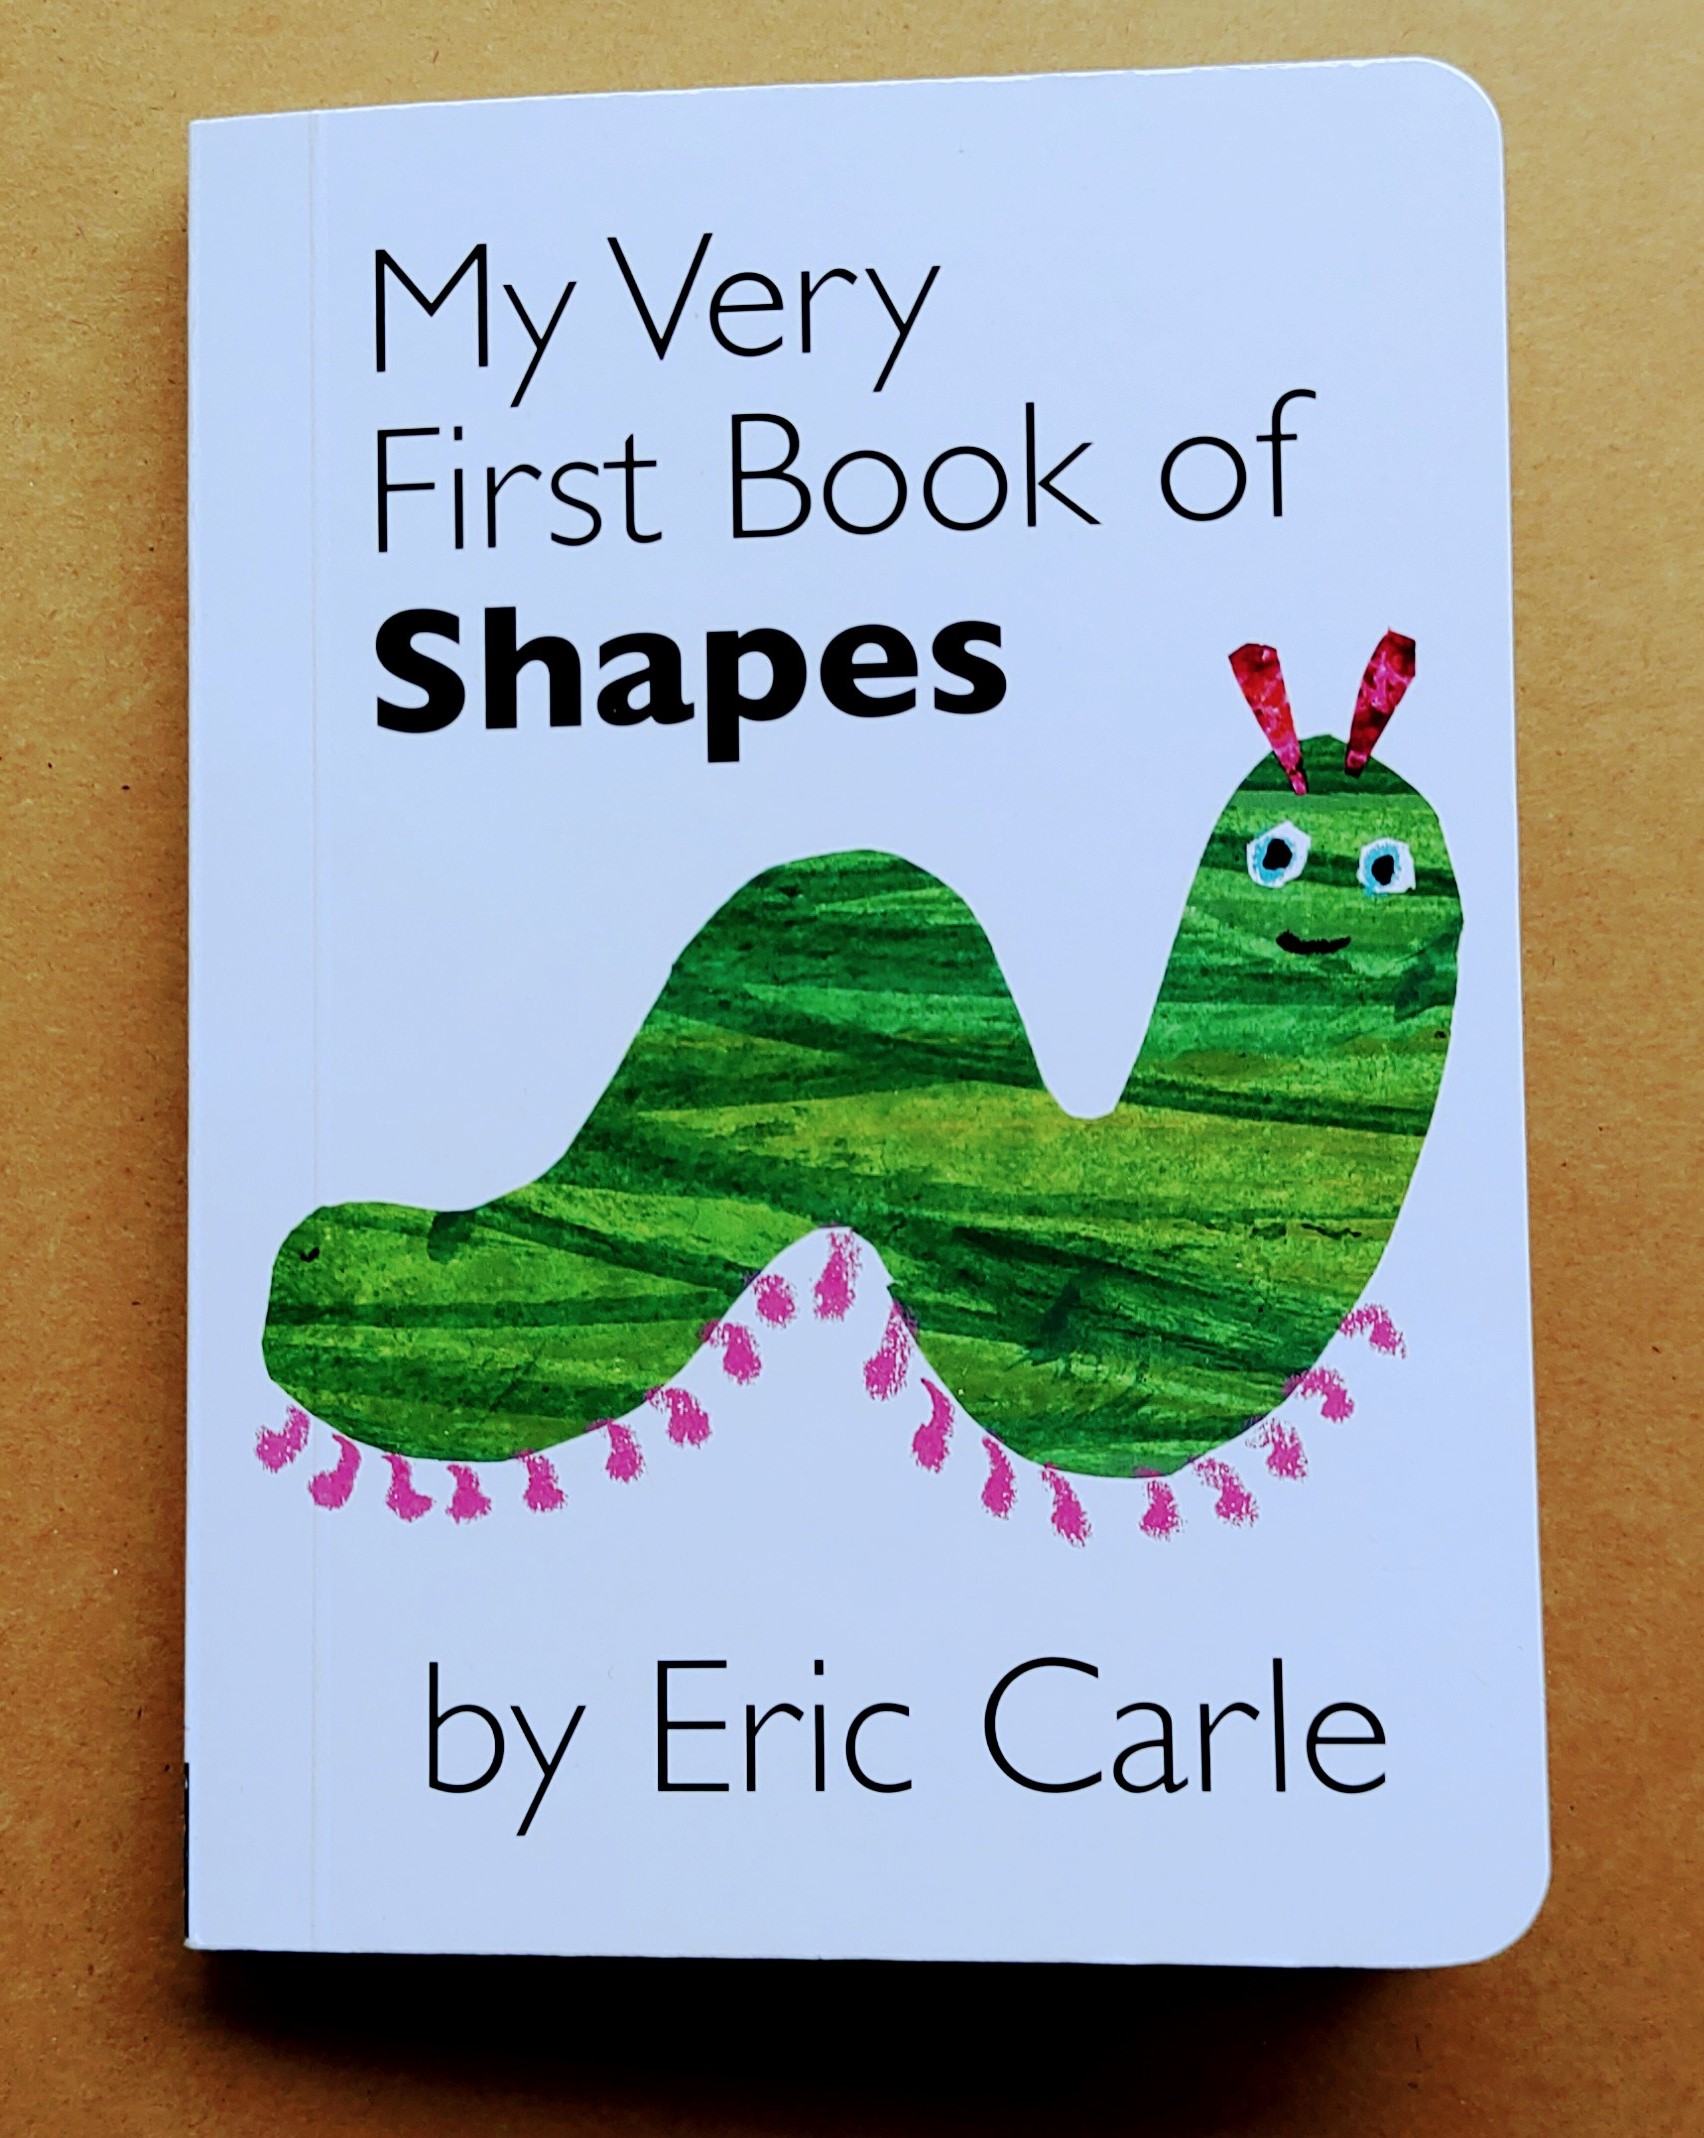 My very first book of shapes 英語教室、レッスンで！！お得な４冊セット